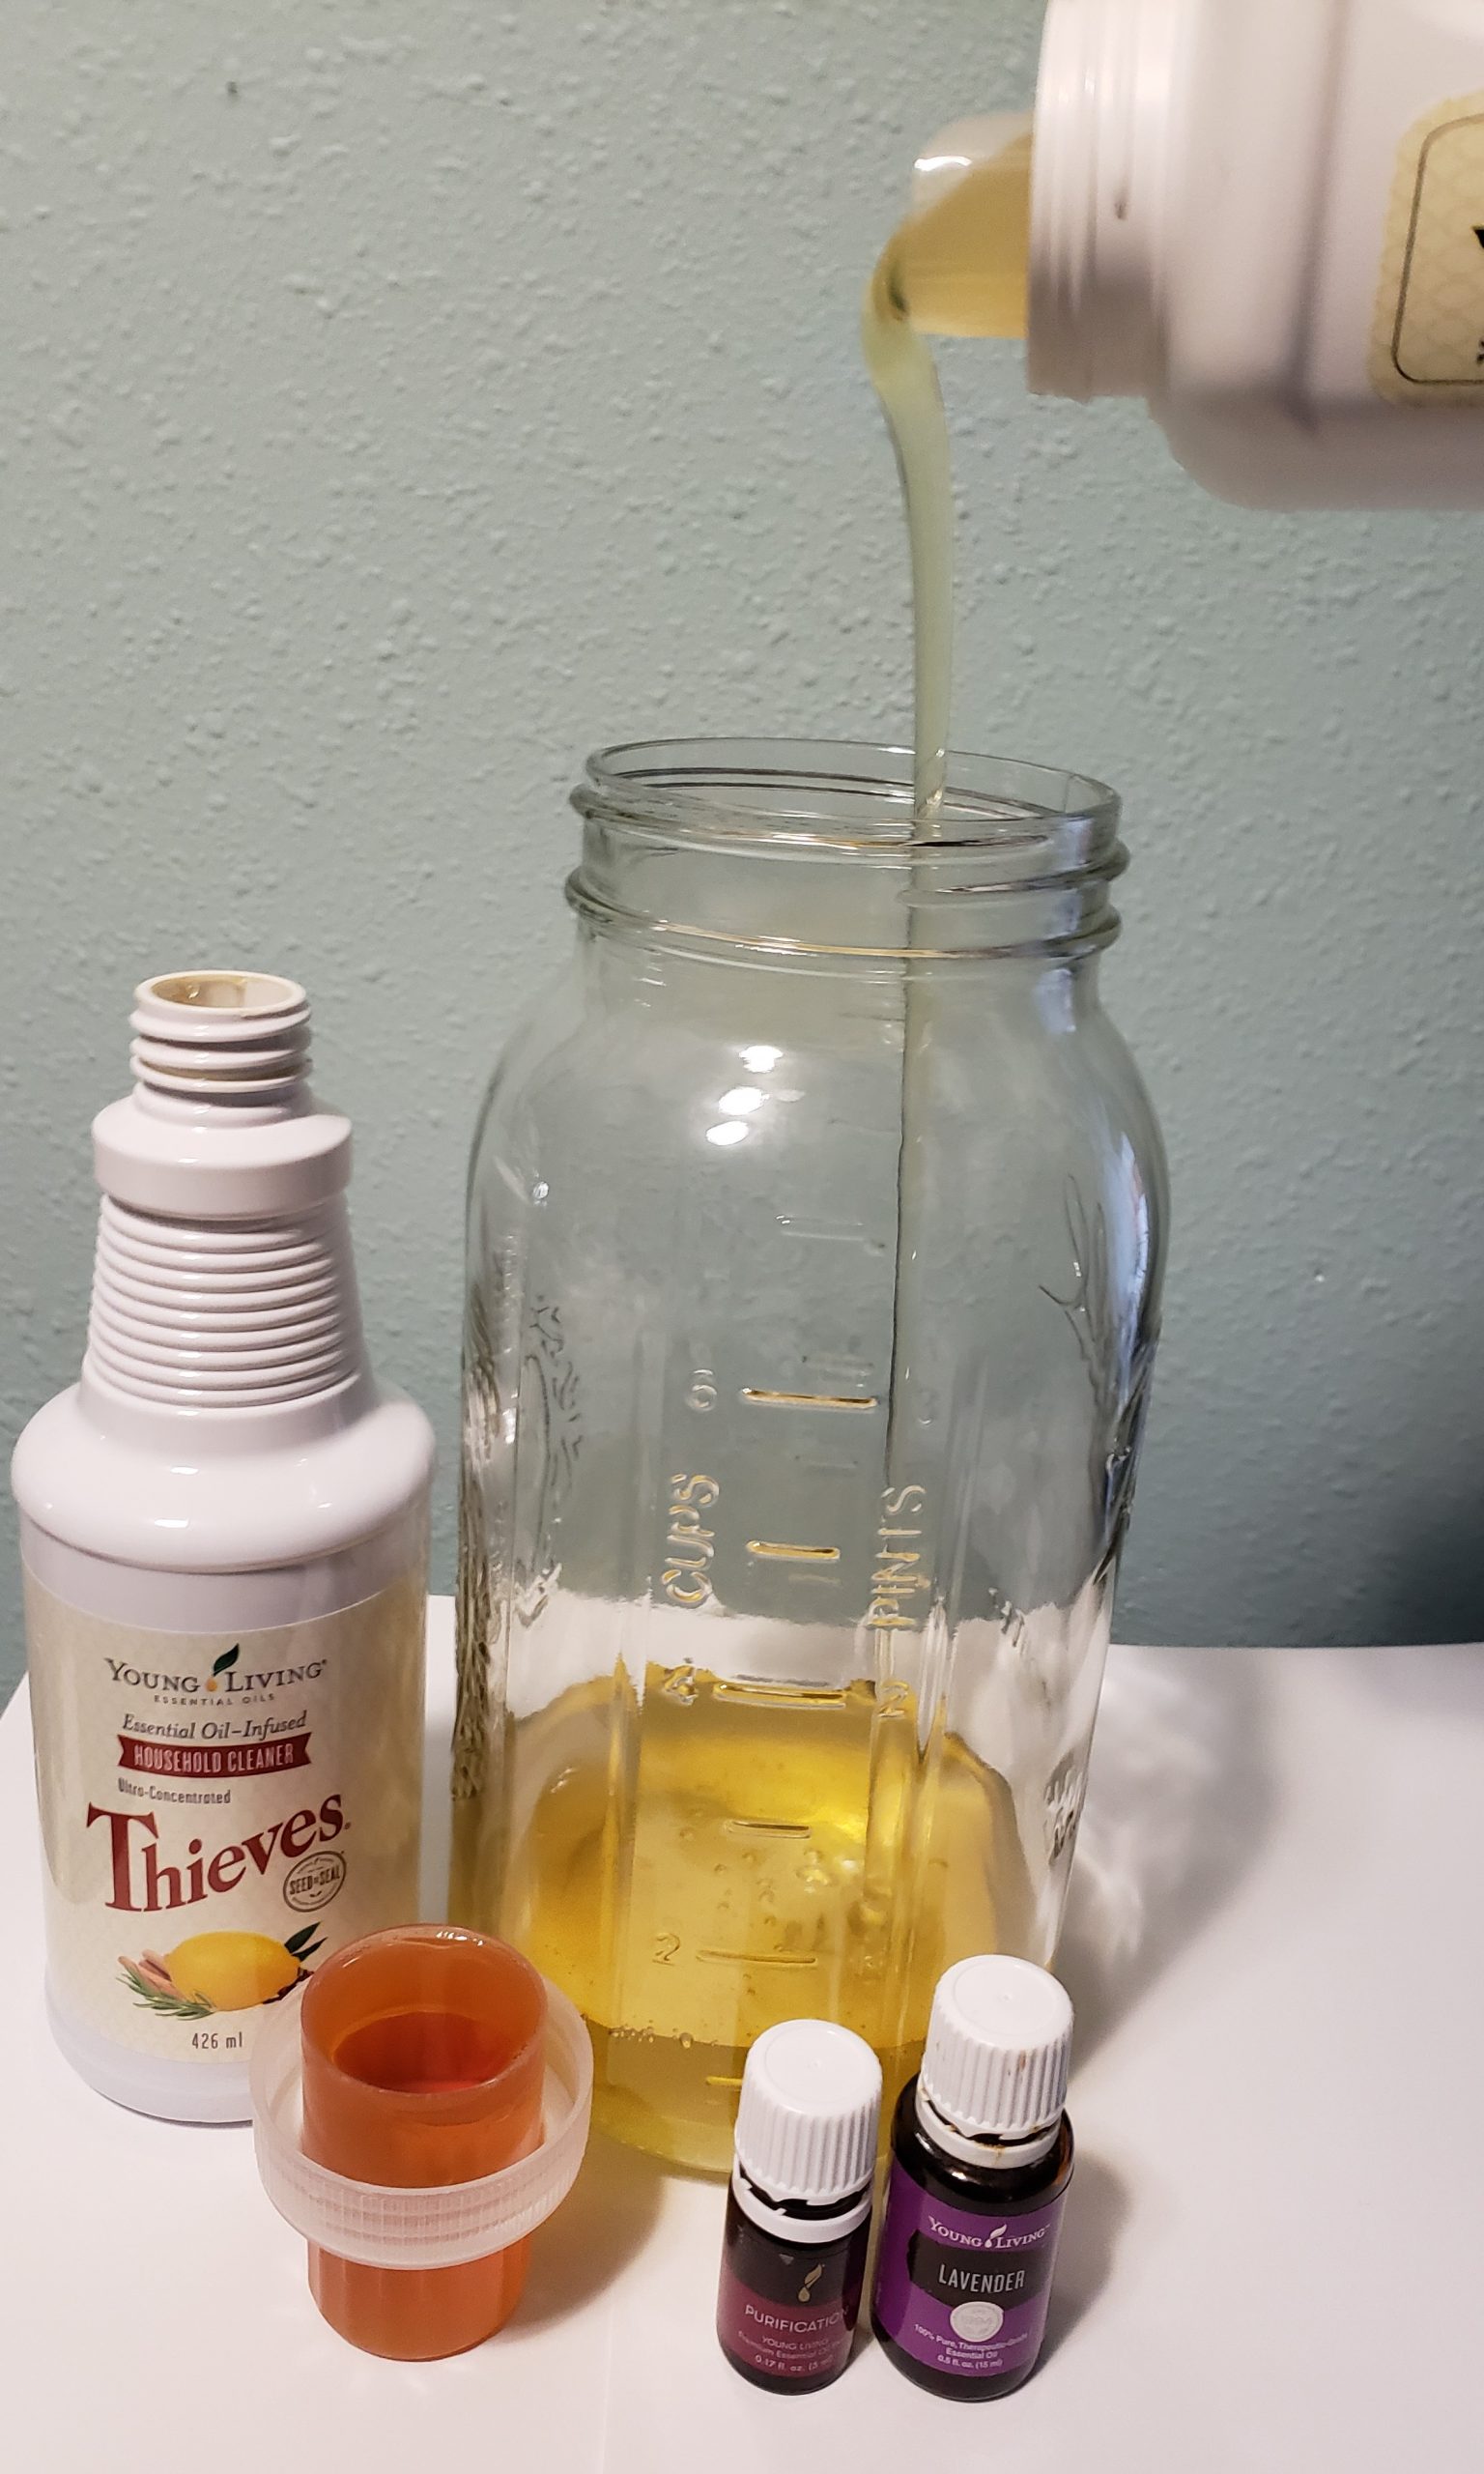 young living thieves laundry soap being poured into large glass jar next to thieves household cleaner and purification blend and lavender essential oil